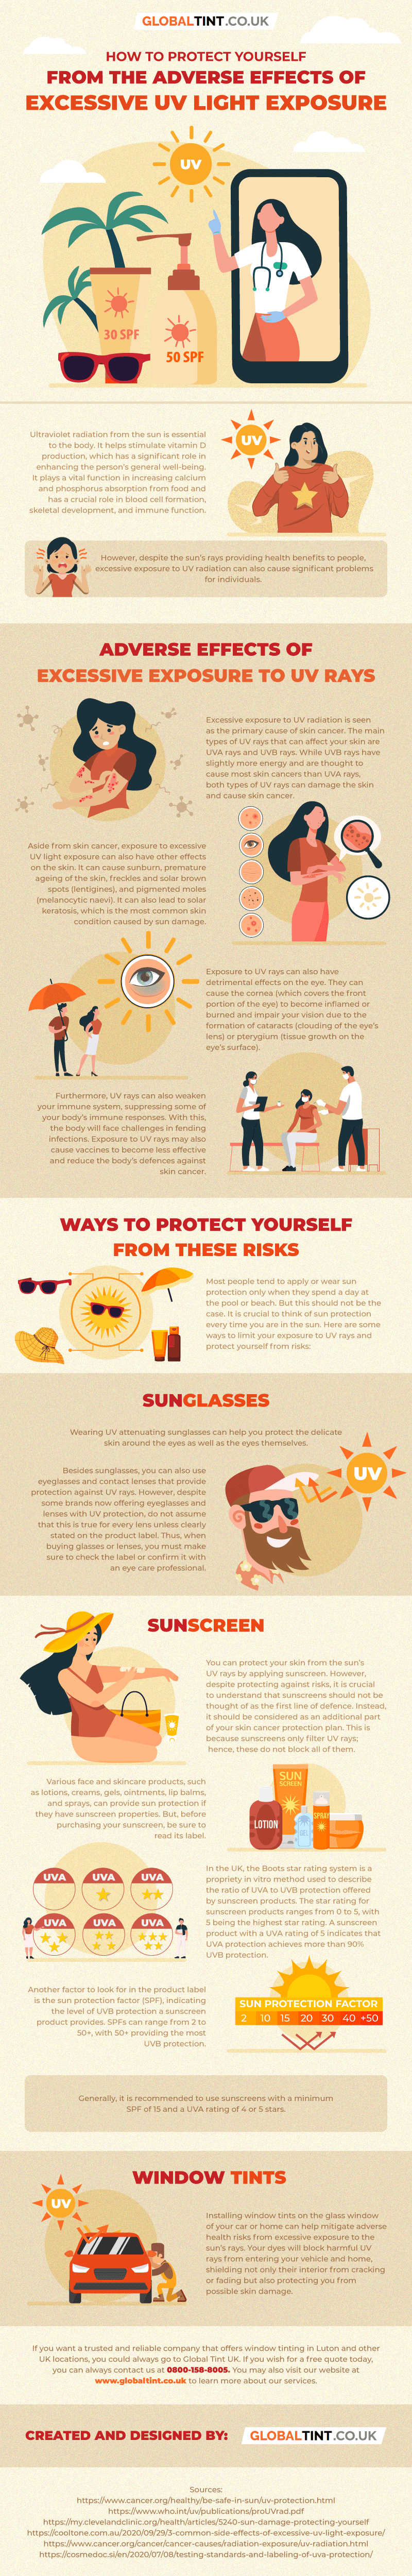 How-To-Protect-Yourself-From-the-Adverse-Effects-of-Excessive-UV-Light-Exposure